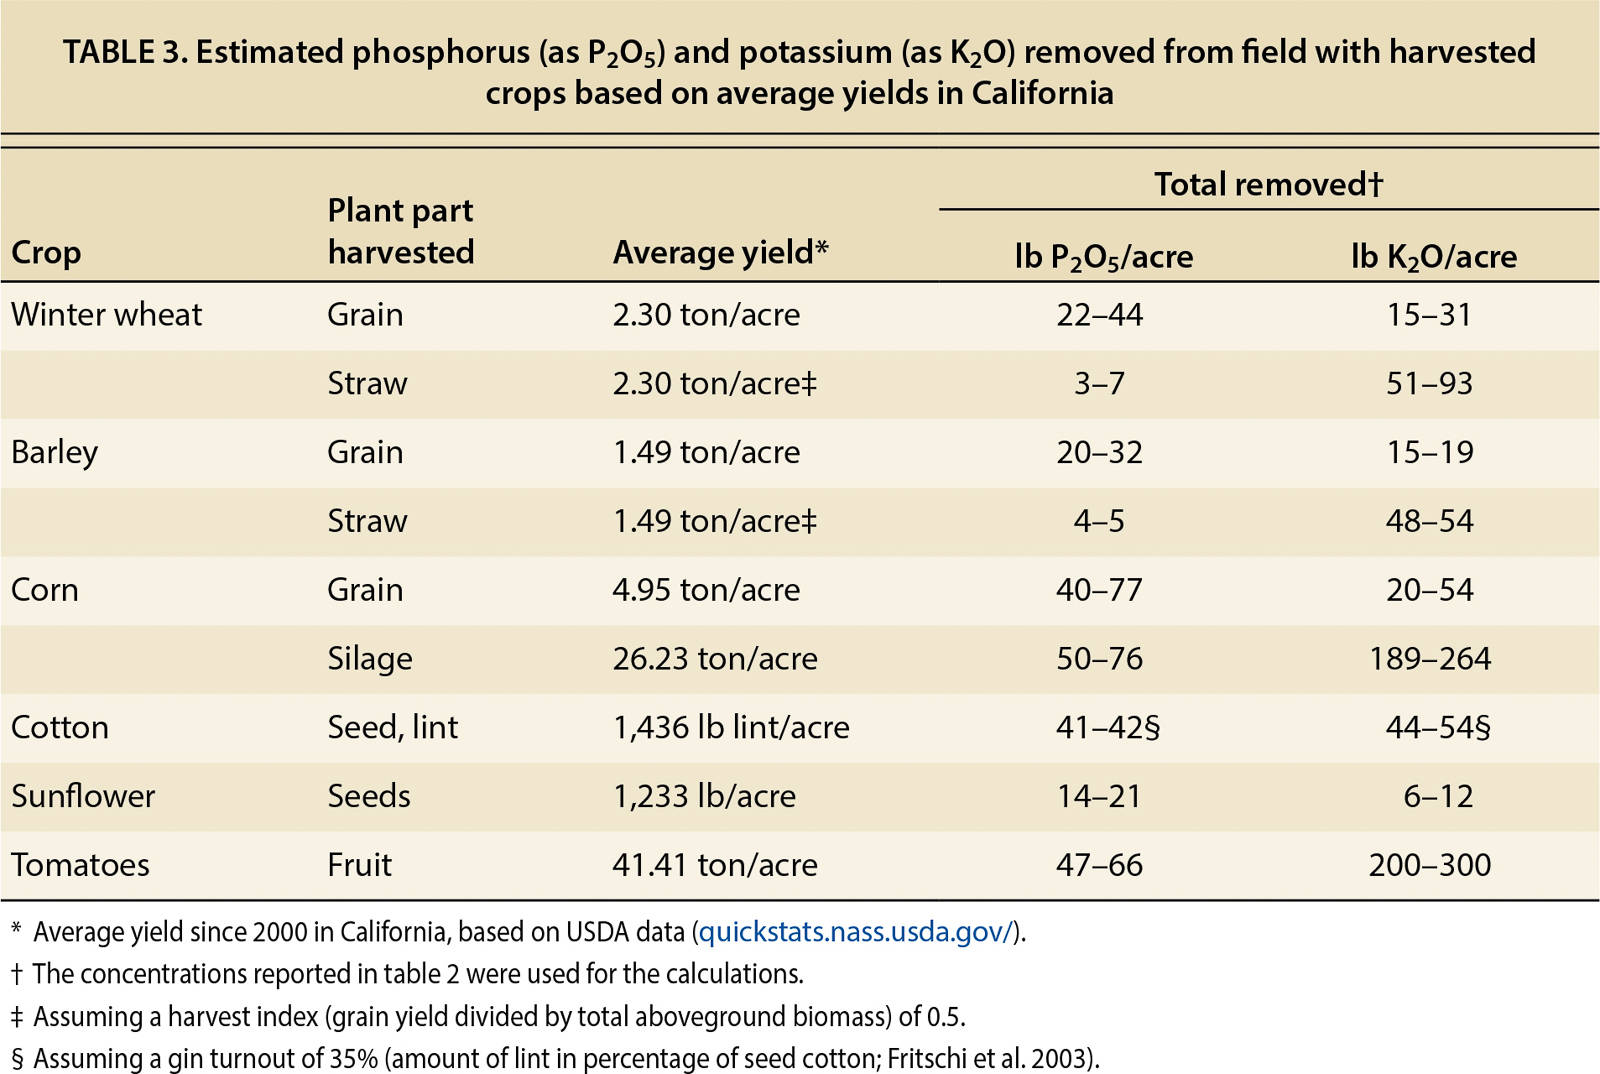 Estimated phosphorus (as P2O5) and potassium (as K2O) removed from field with harvested crops based on average yields in California